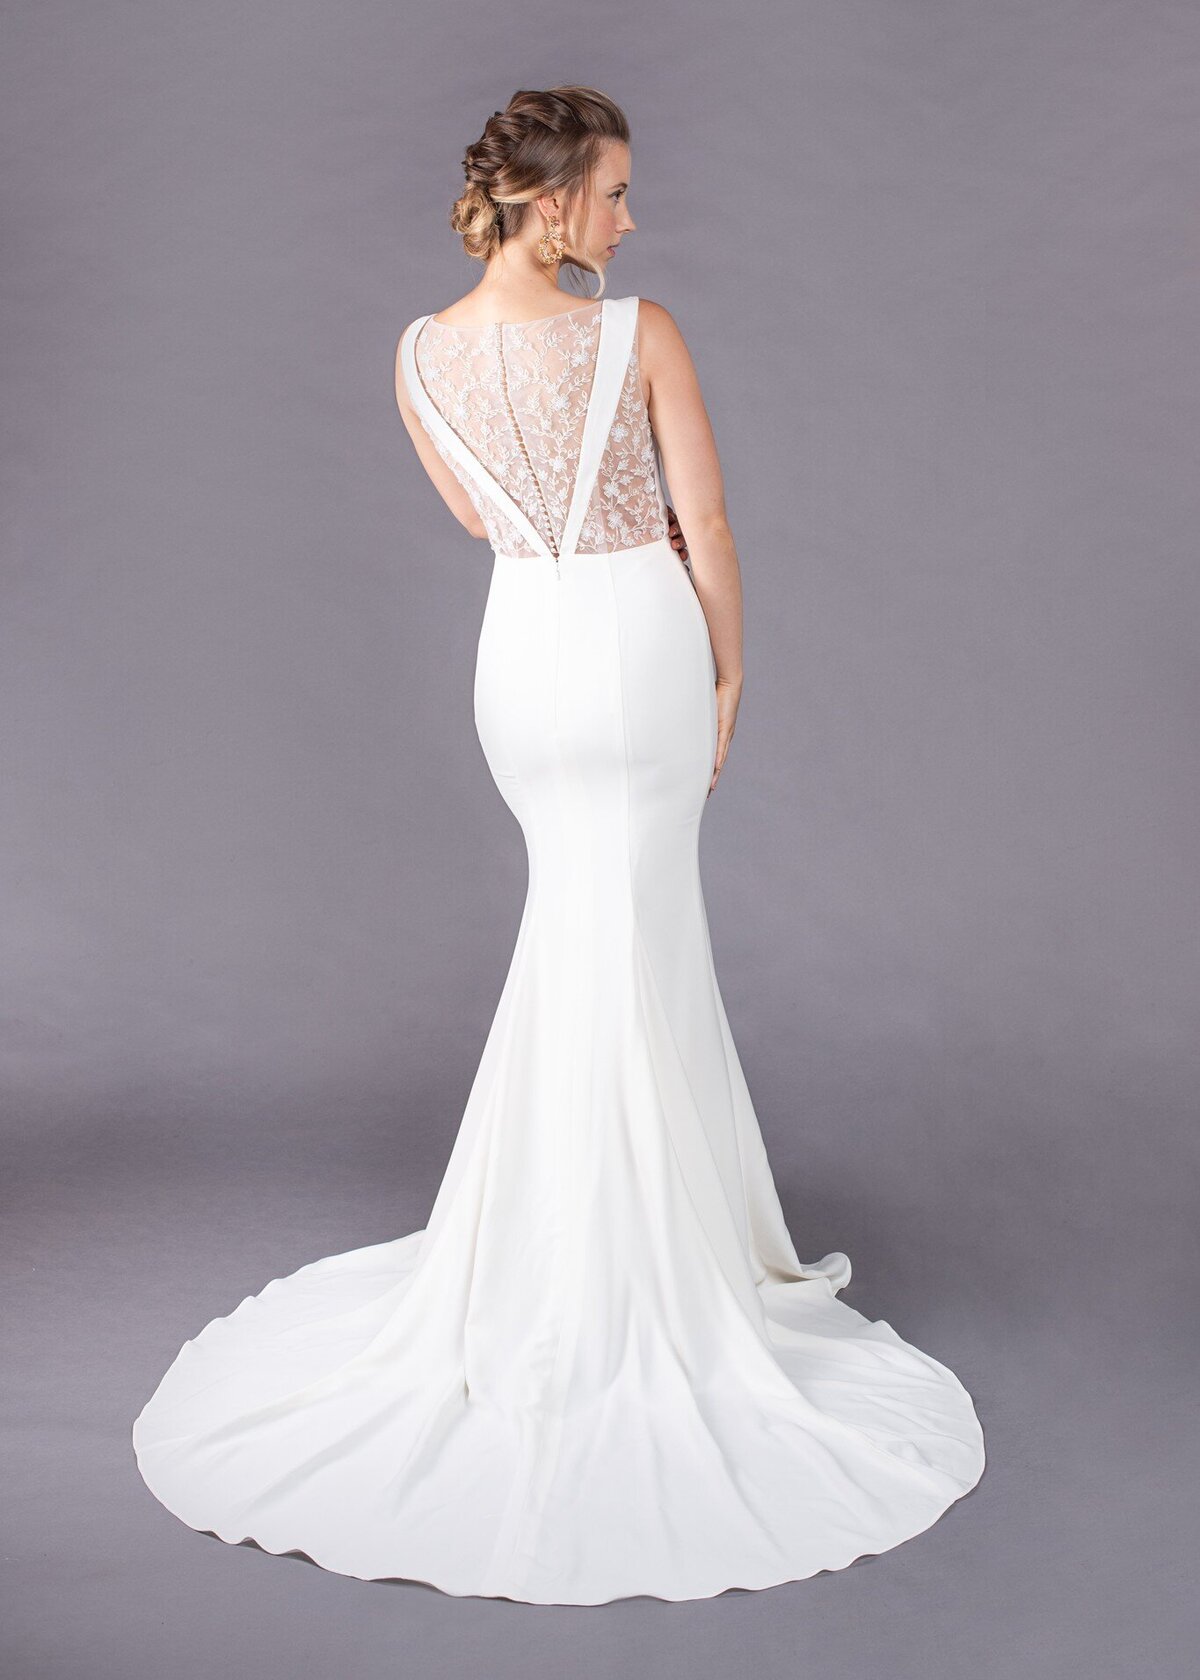 The embroidered illusion back is paired with the crepe fit-and-flare skirt for a unique yet timeless bridal look.